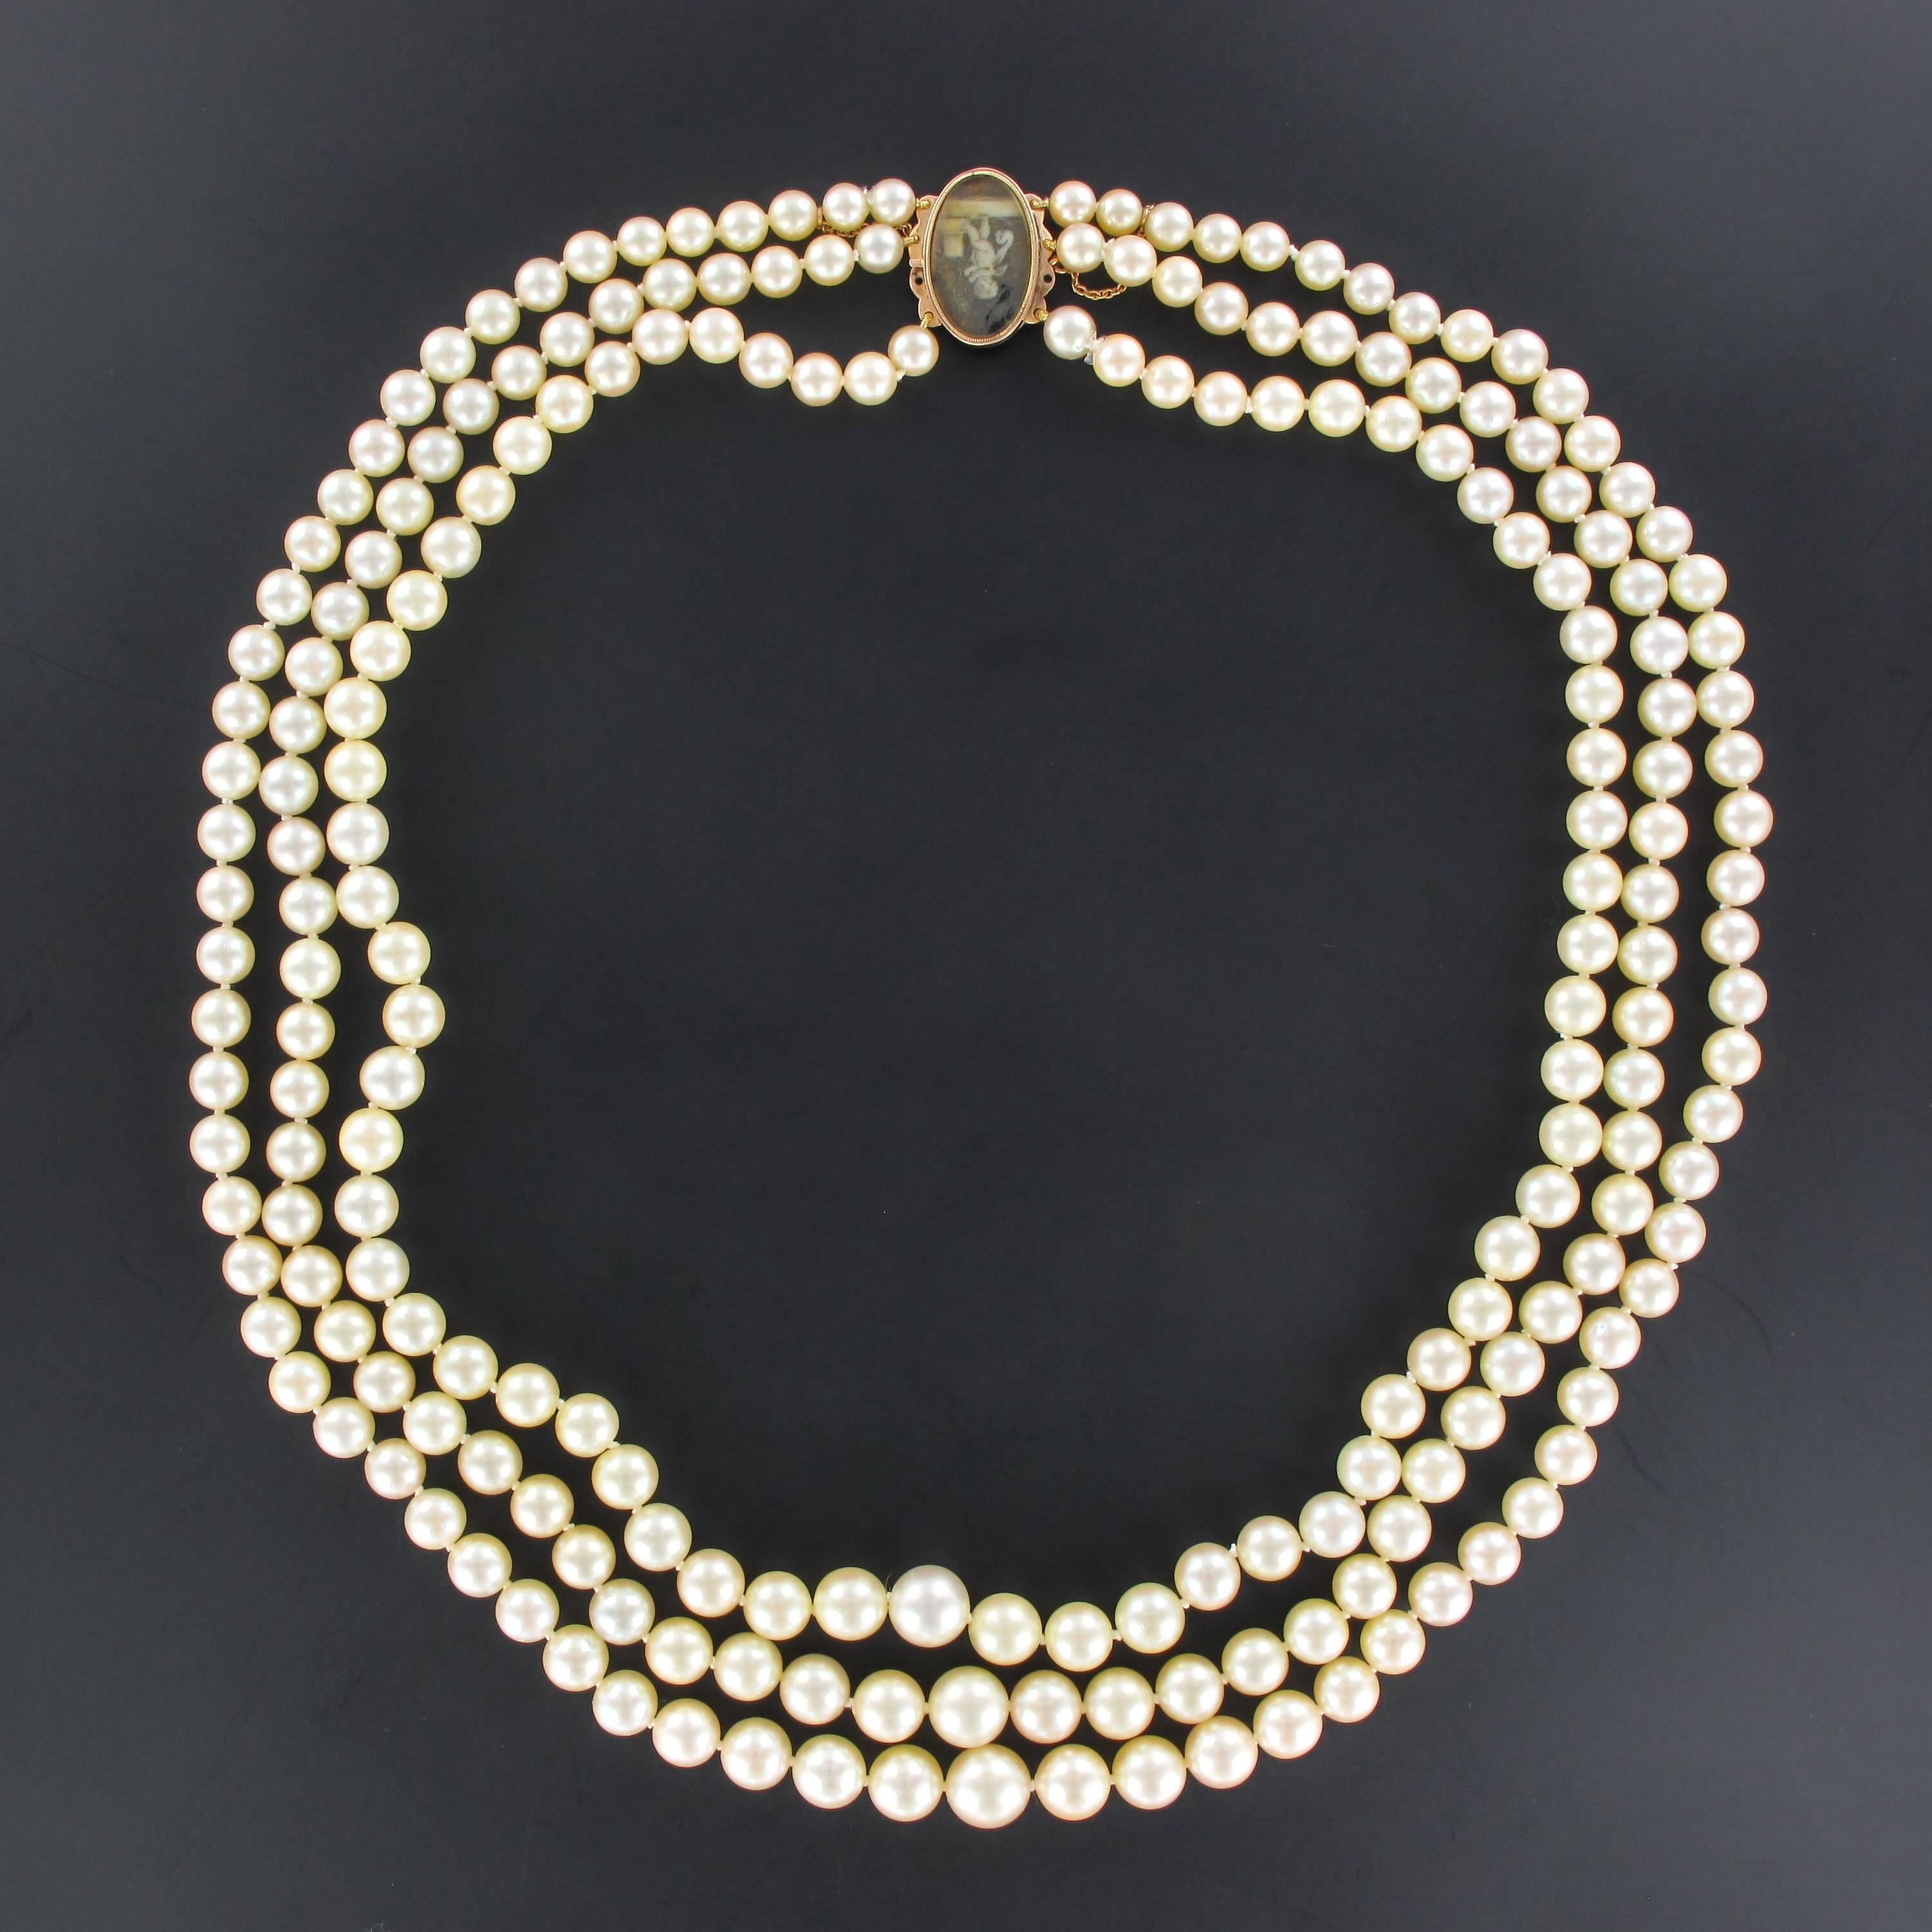 This  pearl necklace is composed of three strands of Japanese cultured pearls which are held together by an oval 18K rose gold clasp, french mixed hallmark. It is set with a miniature on enamel representing an anglelot and is accompanied by a safety